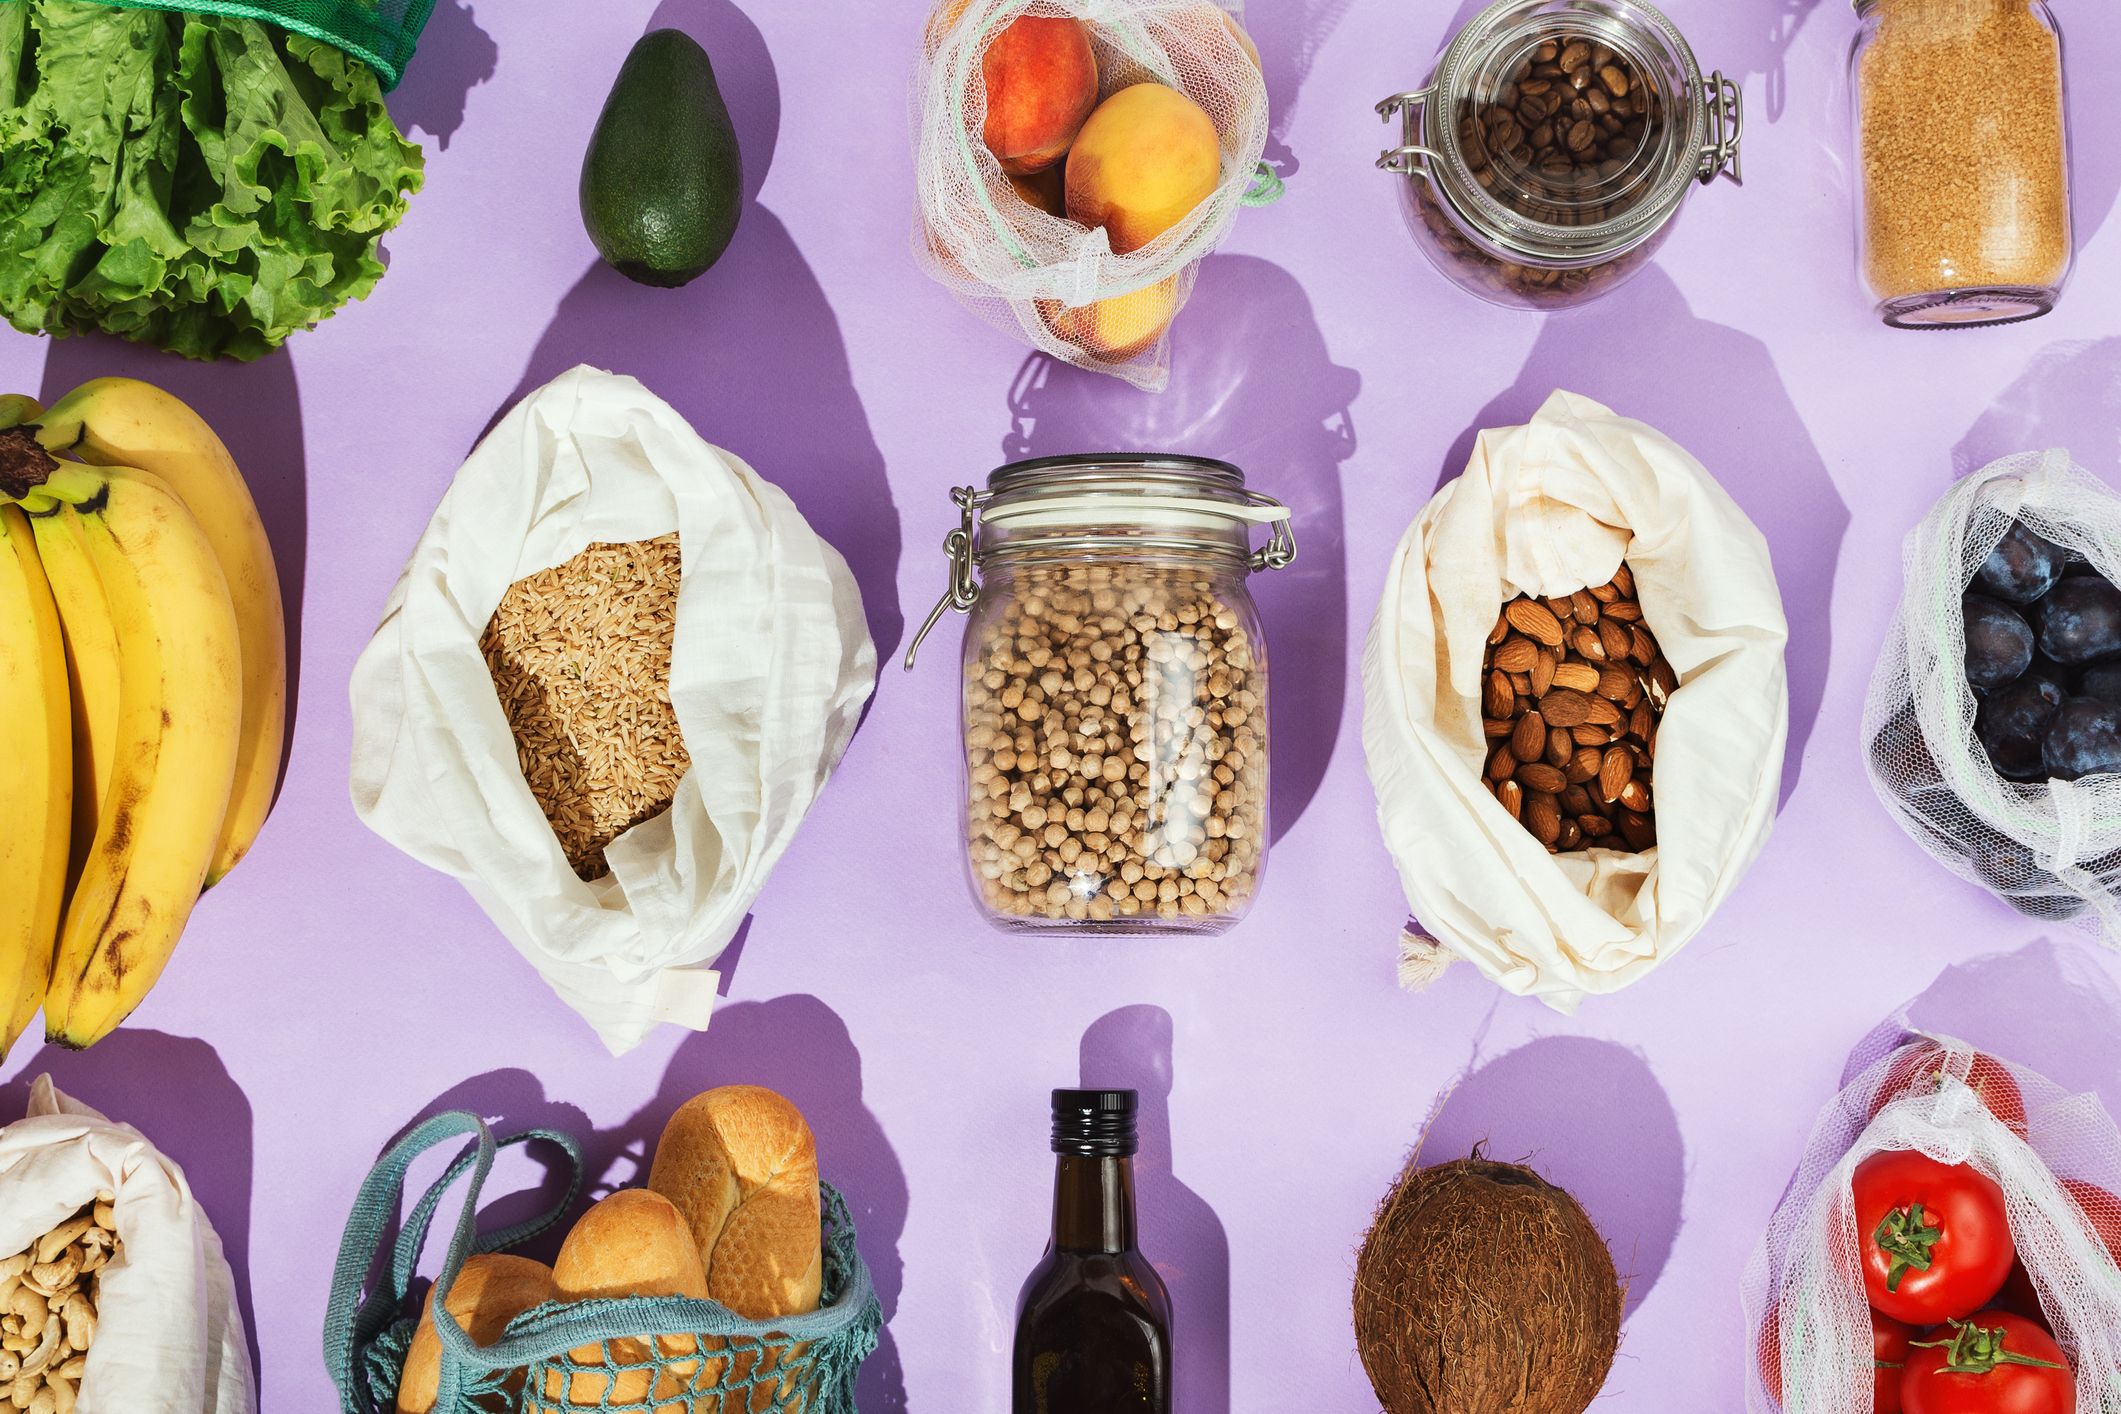 Running out of food? You might feel unmotivated to cook but don't run to the grocery store just yet — use your pantry items as creative and nutritious substitutes.